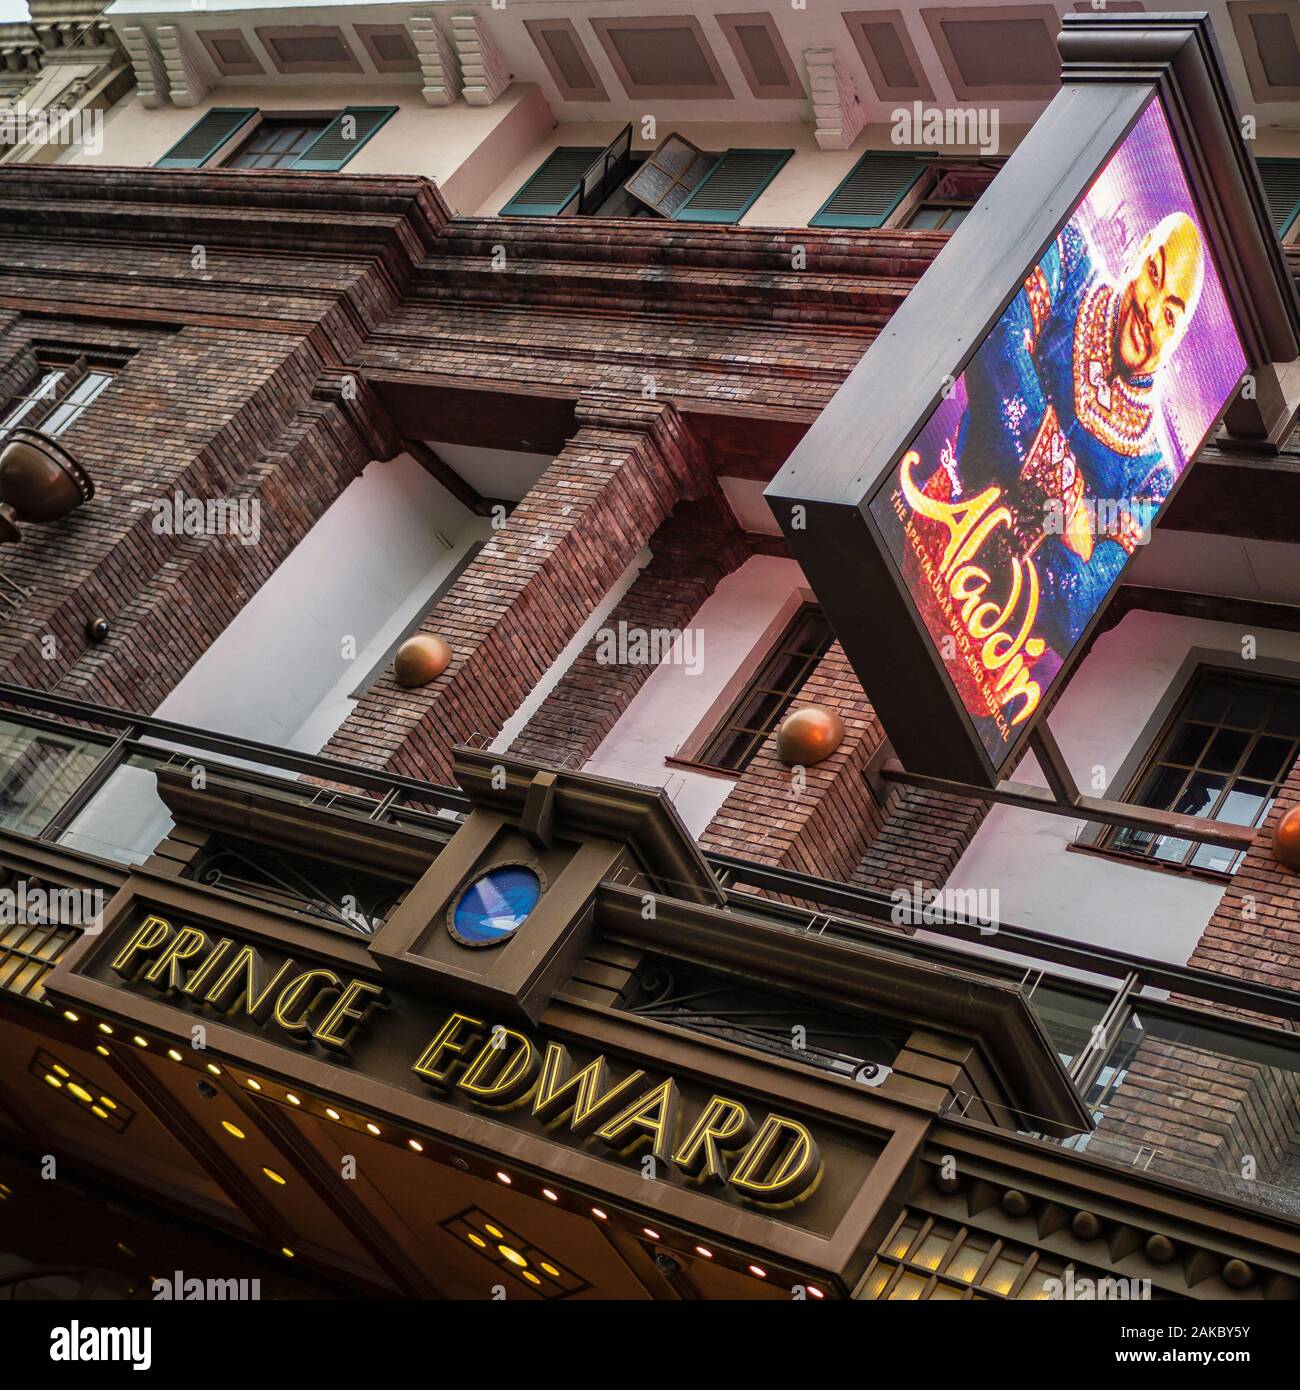 WESTEND, LONDON:  Prince Edward Theatre in Old Compton Street with poster for Aladdin Musical show Stock Photo